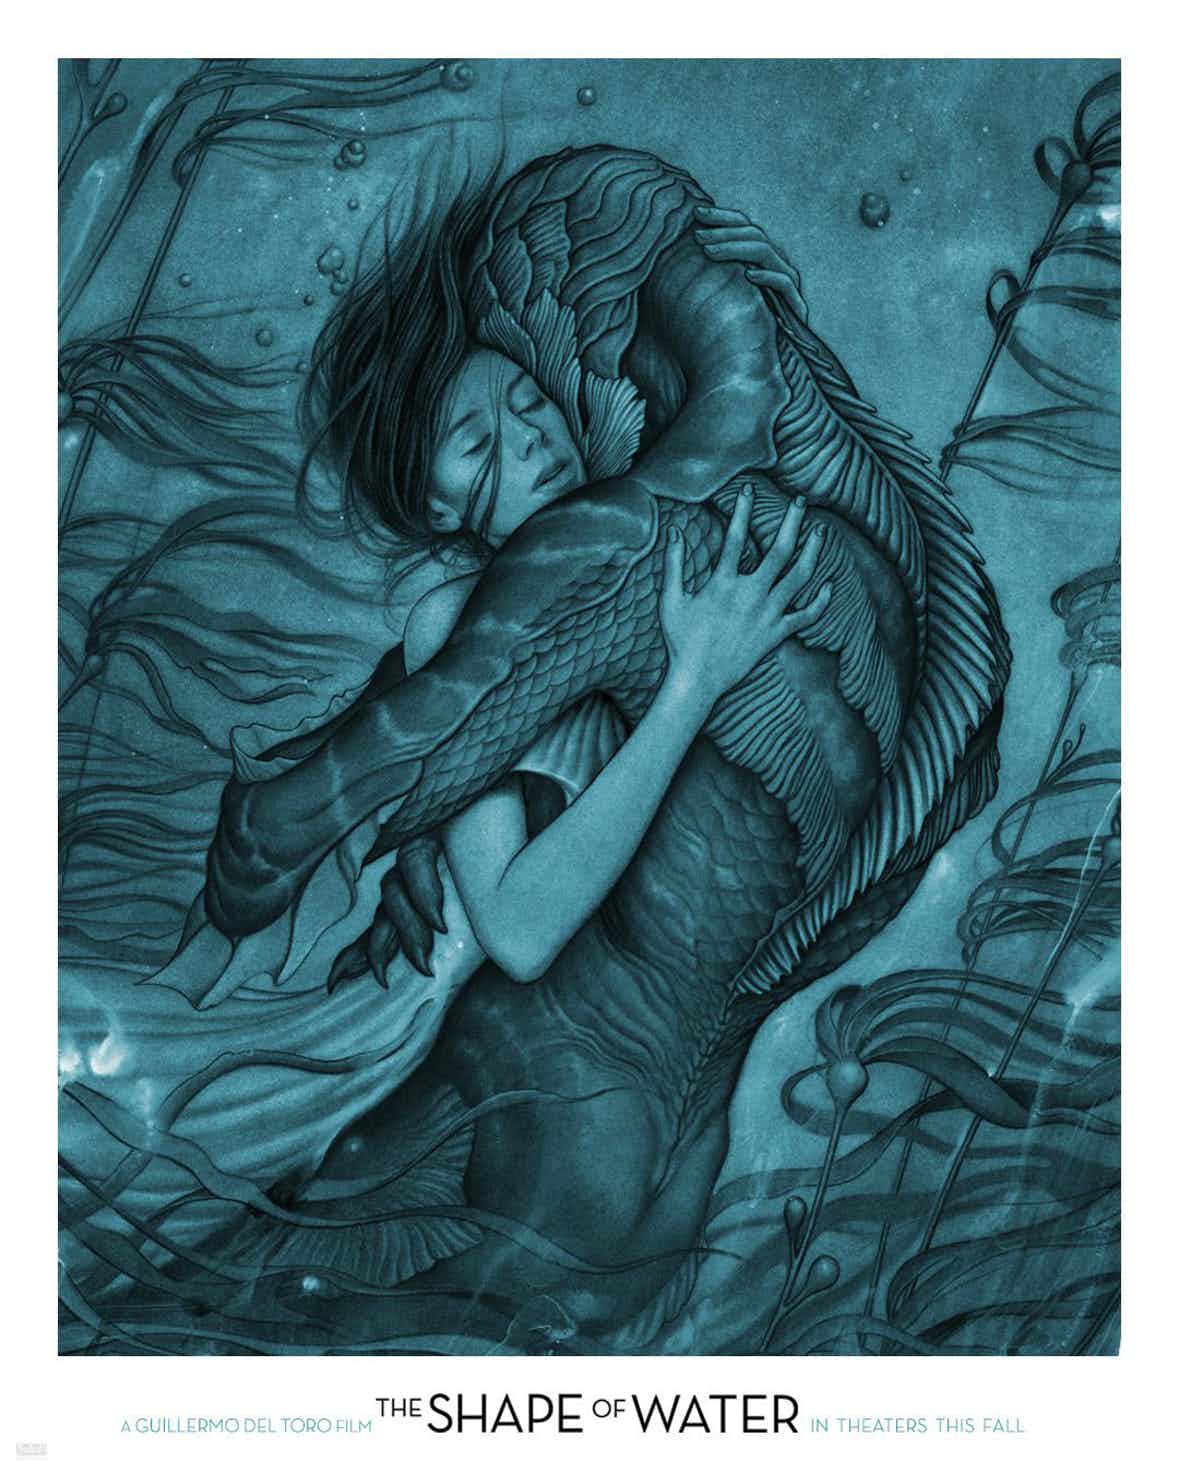 The-Shape-of-Water-Poster-by-James-Jean.